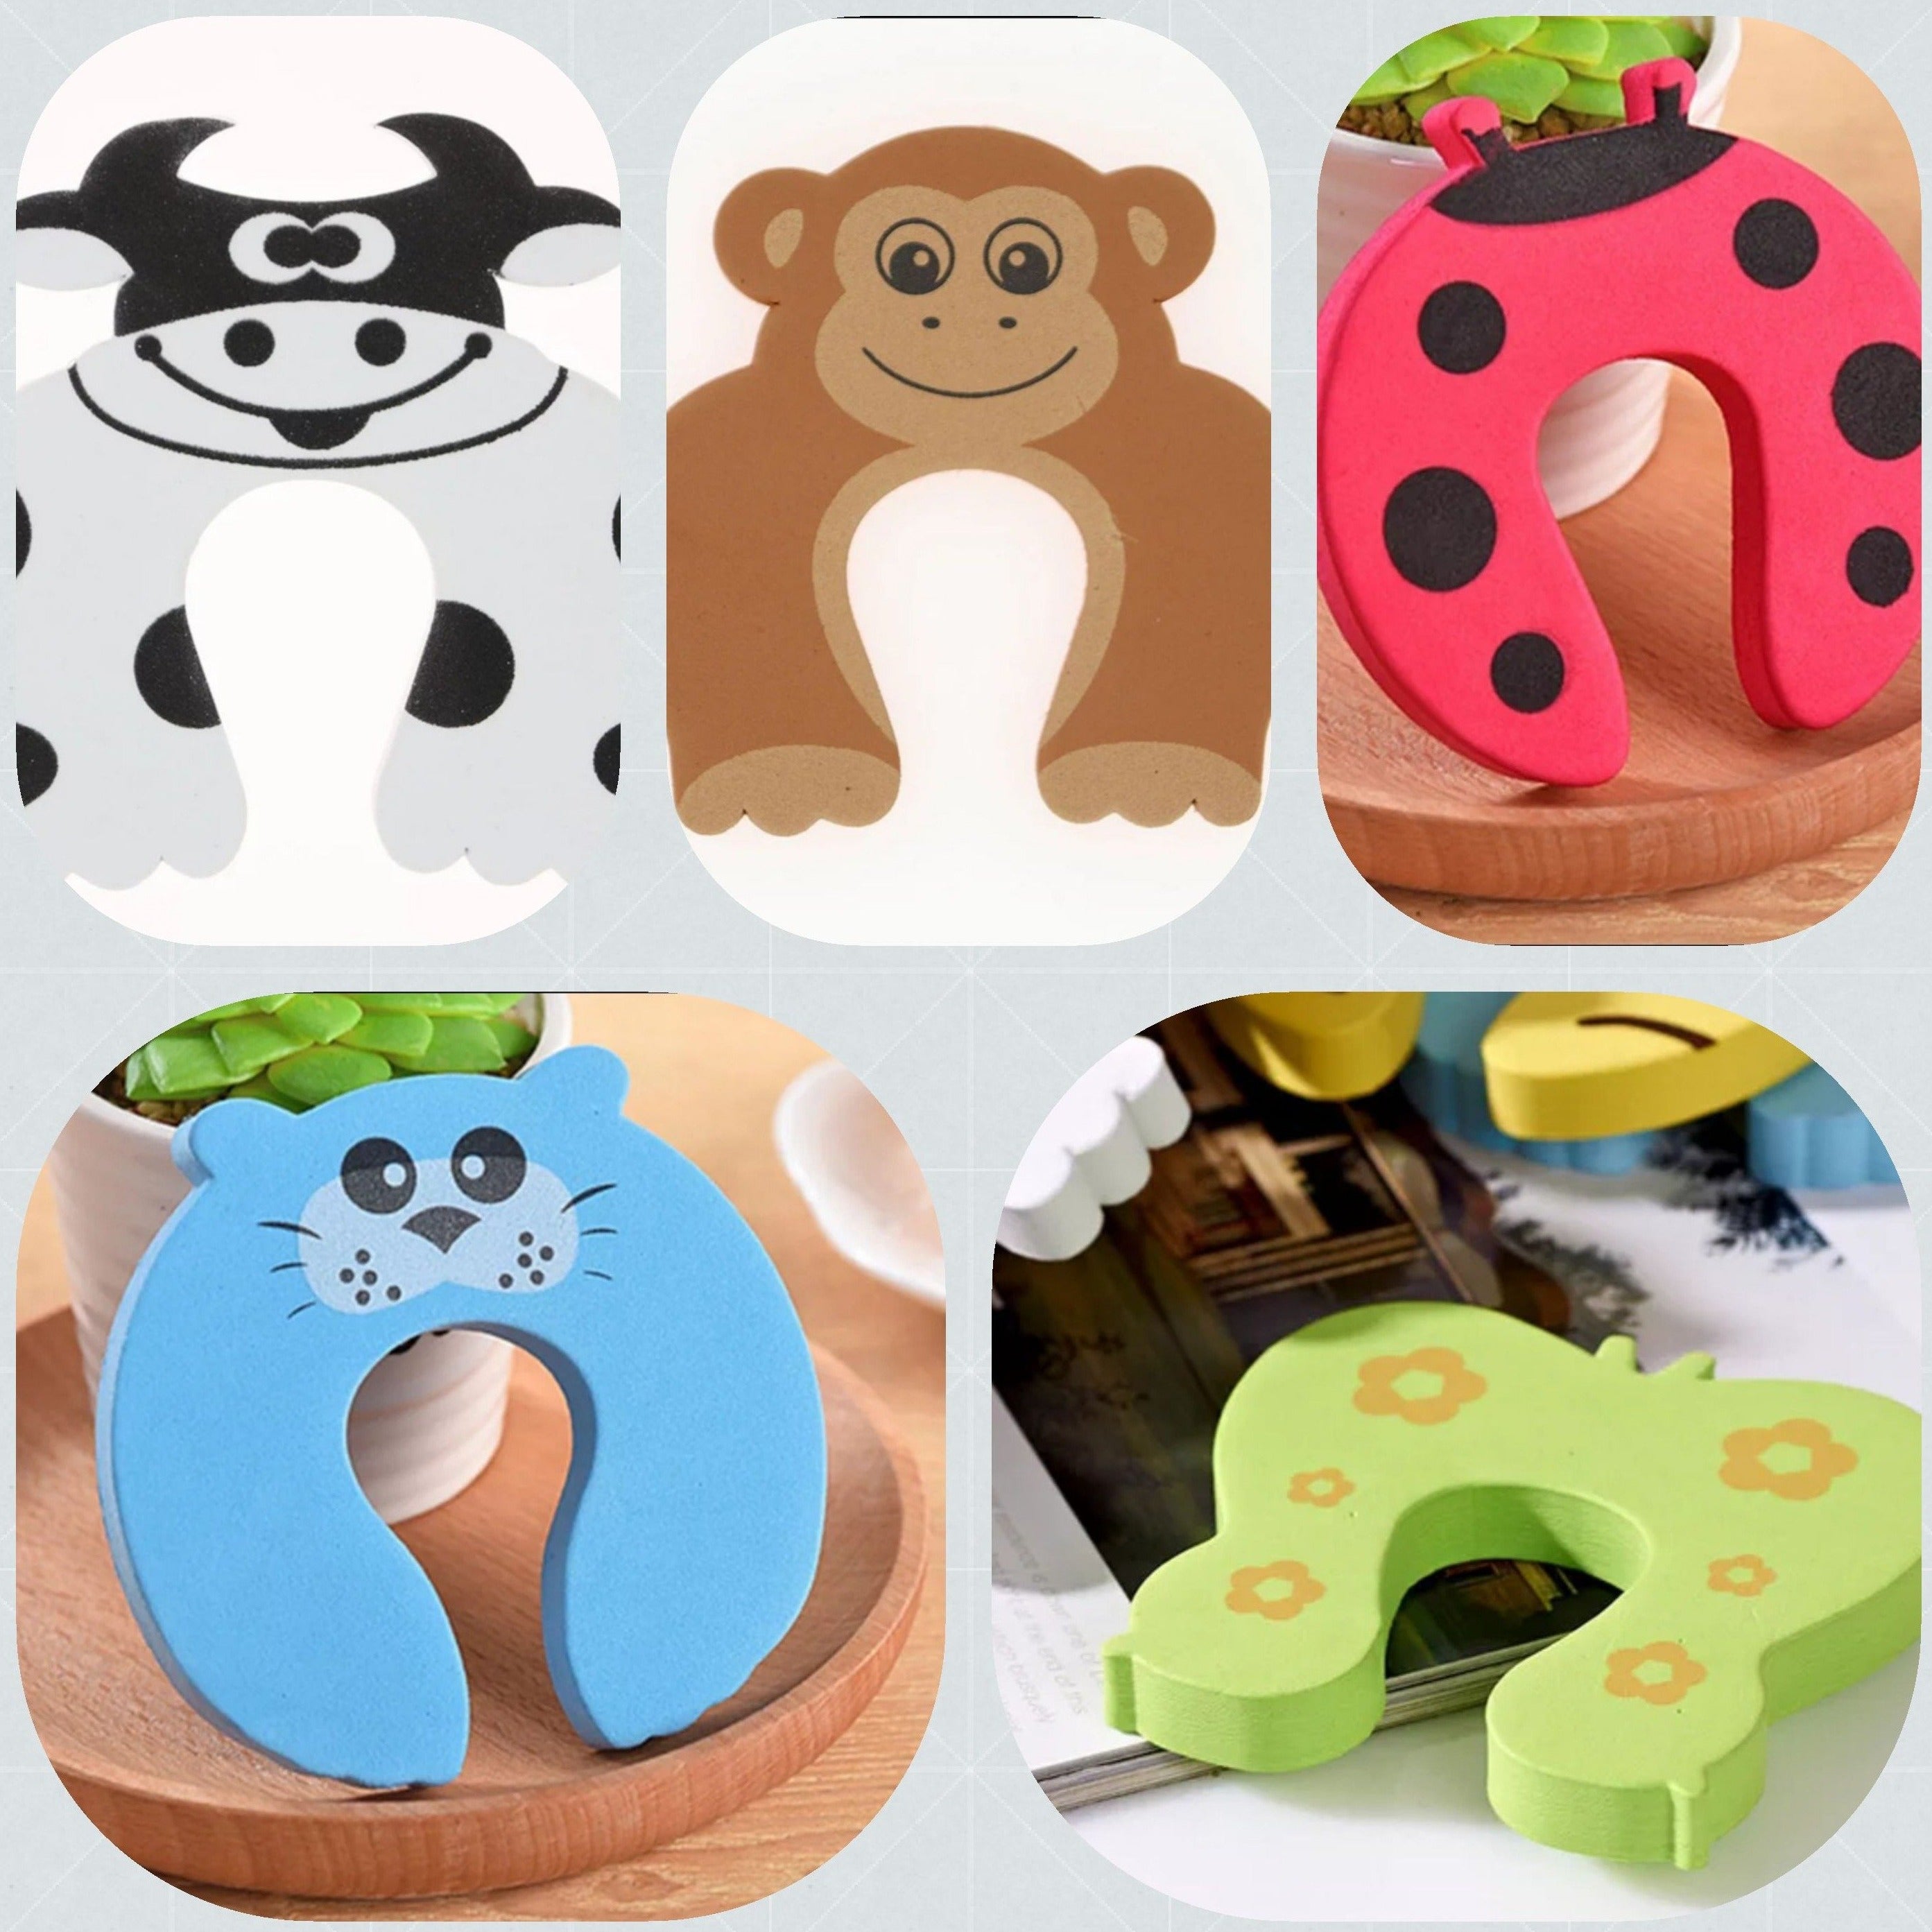 Toddler & Baby safety door stopper - 5 pack